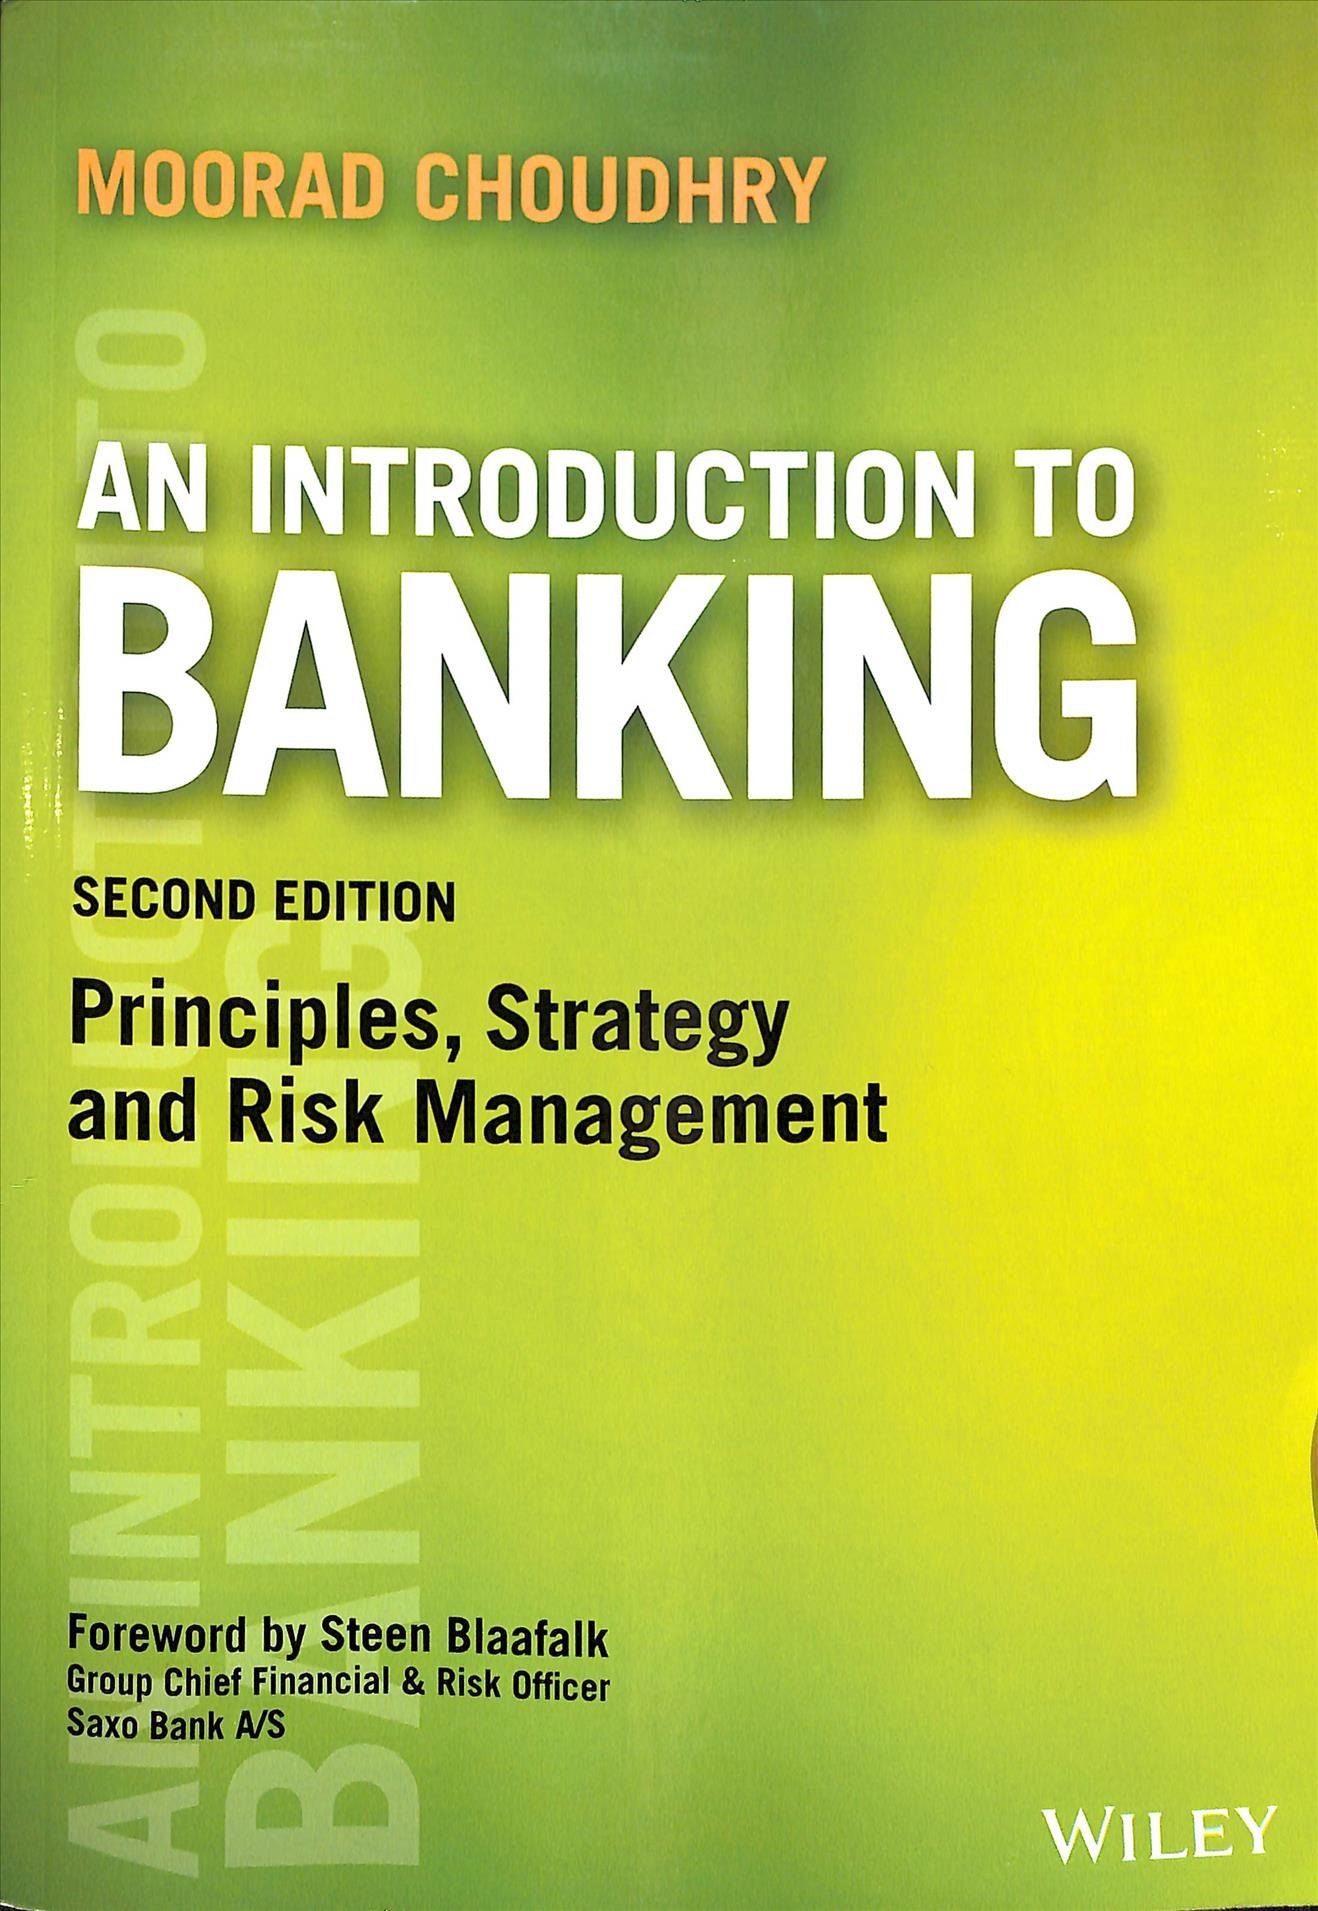 An Introduction To Banking 2e - Principles, Strategy and Risk Management